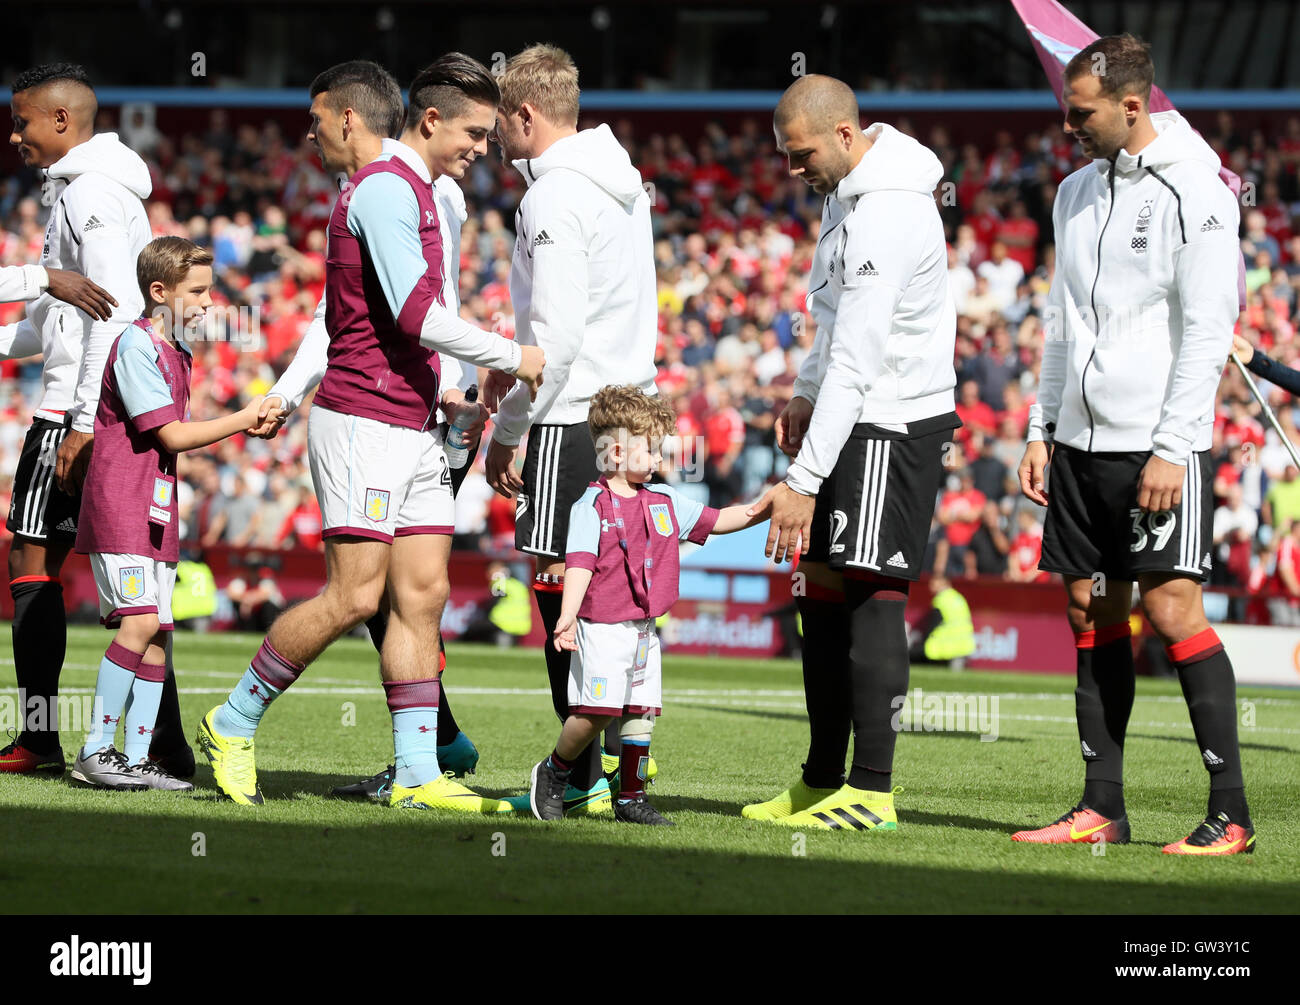 Aston Villa's Jack Grealish lines-up with mascot Carter Carrington during the Sky Bet Championship match at Villa Park, Birmingham. PRESS ASSOCIATION Photo. Picture date: Sunday September 11, 2016. See PA story SOCCER Villa. Photo credit should read: Martin Rickett/PA Wire. RESTRICTIONS: Editorial use only. Maximum 45 images during a match. No video emulation or promotion as 'live'. No use in games, competitions, merchandise, betting or single club/player services. No use with unofficial audio, video, data, fixtures or club/league logos. Stock Photo